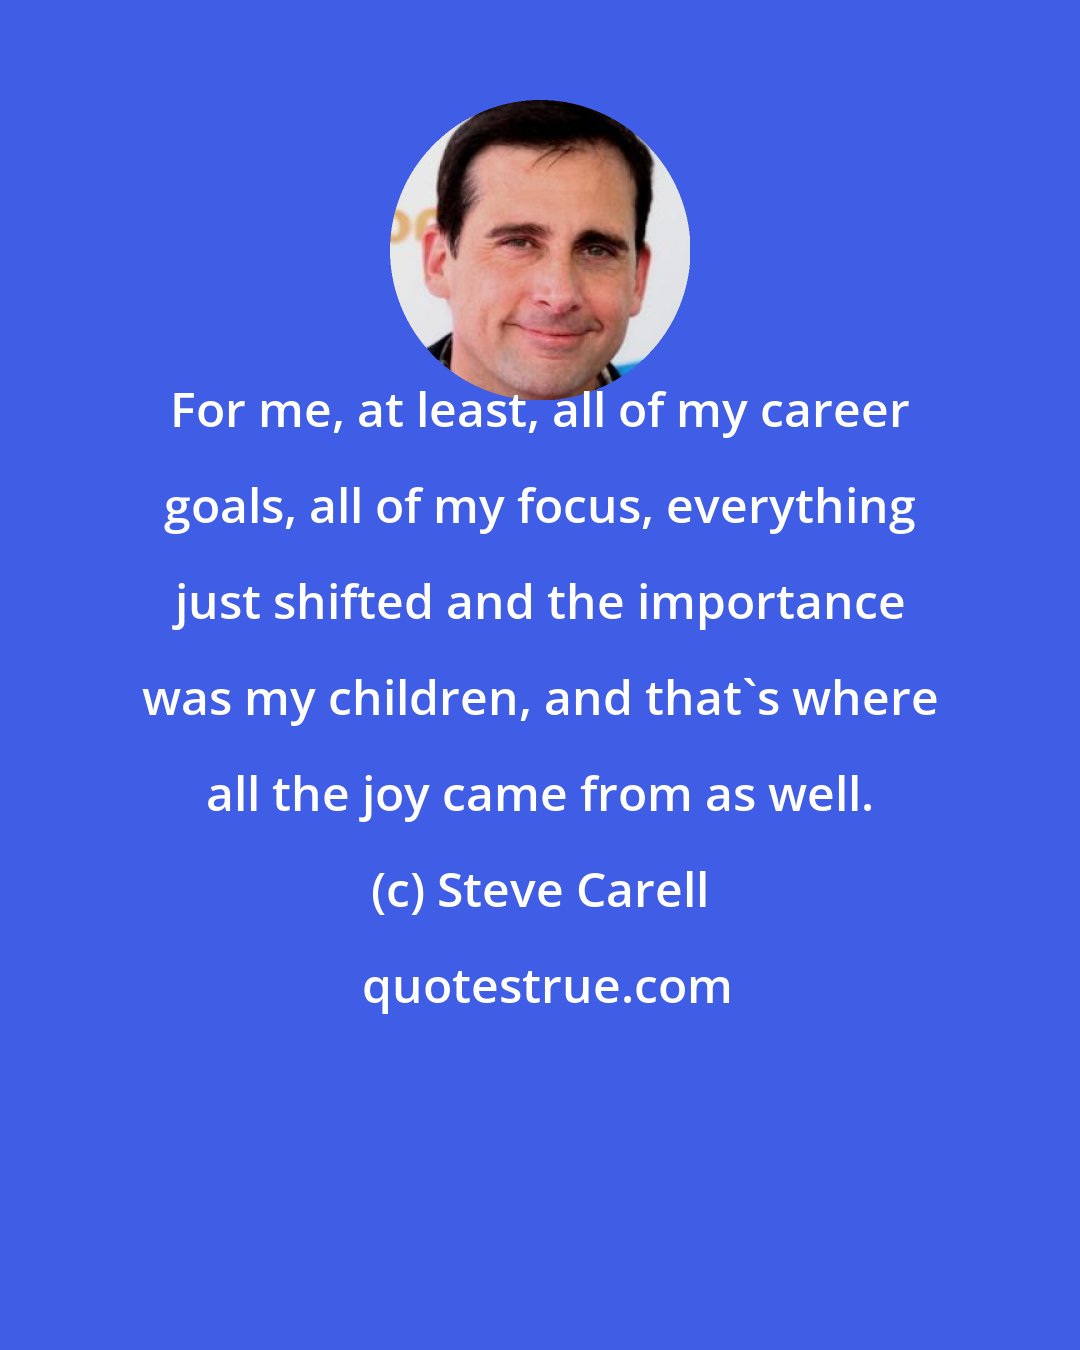 Steve Carell: For me, at least, all of my career goals, all of my focus, everything just shifted and the importance was my children, and that's where all the joy came from as well.